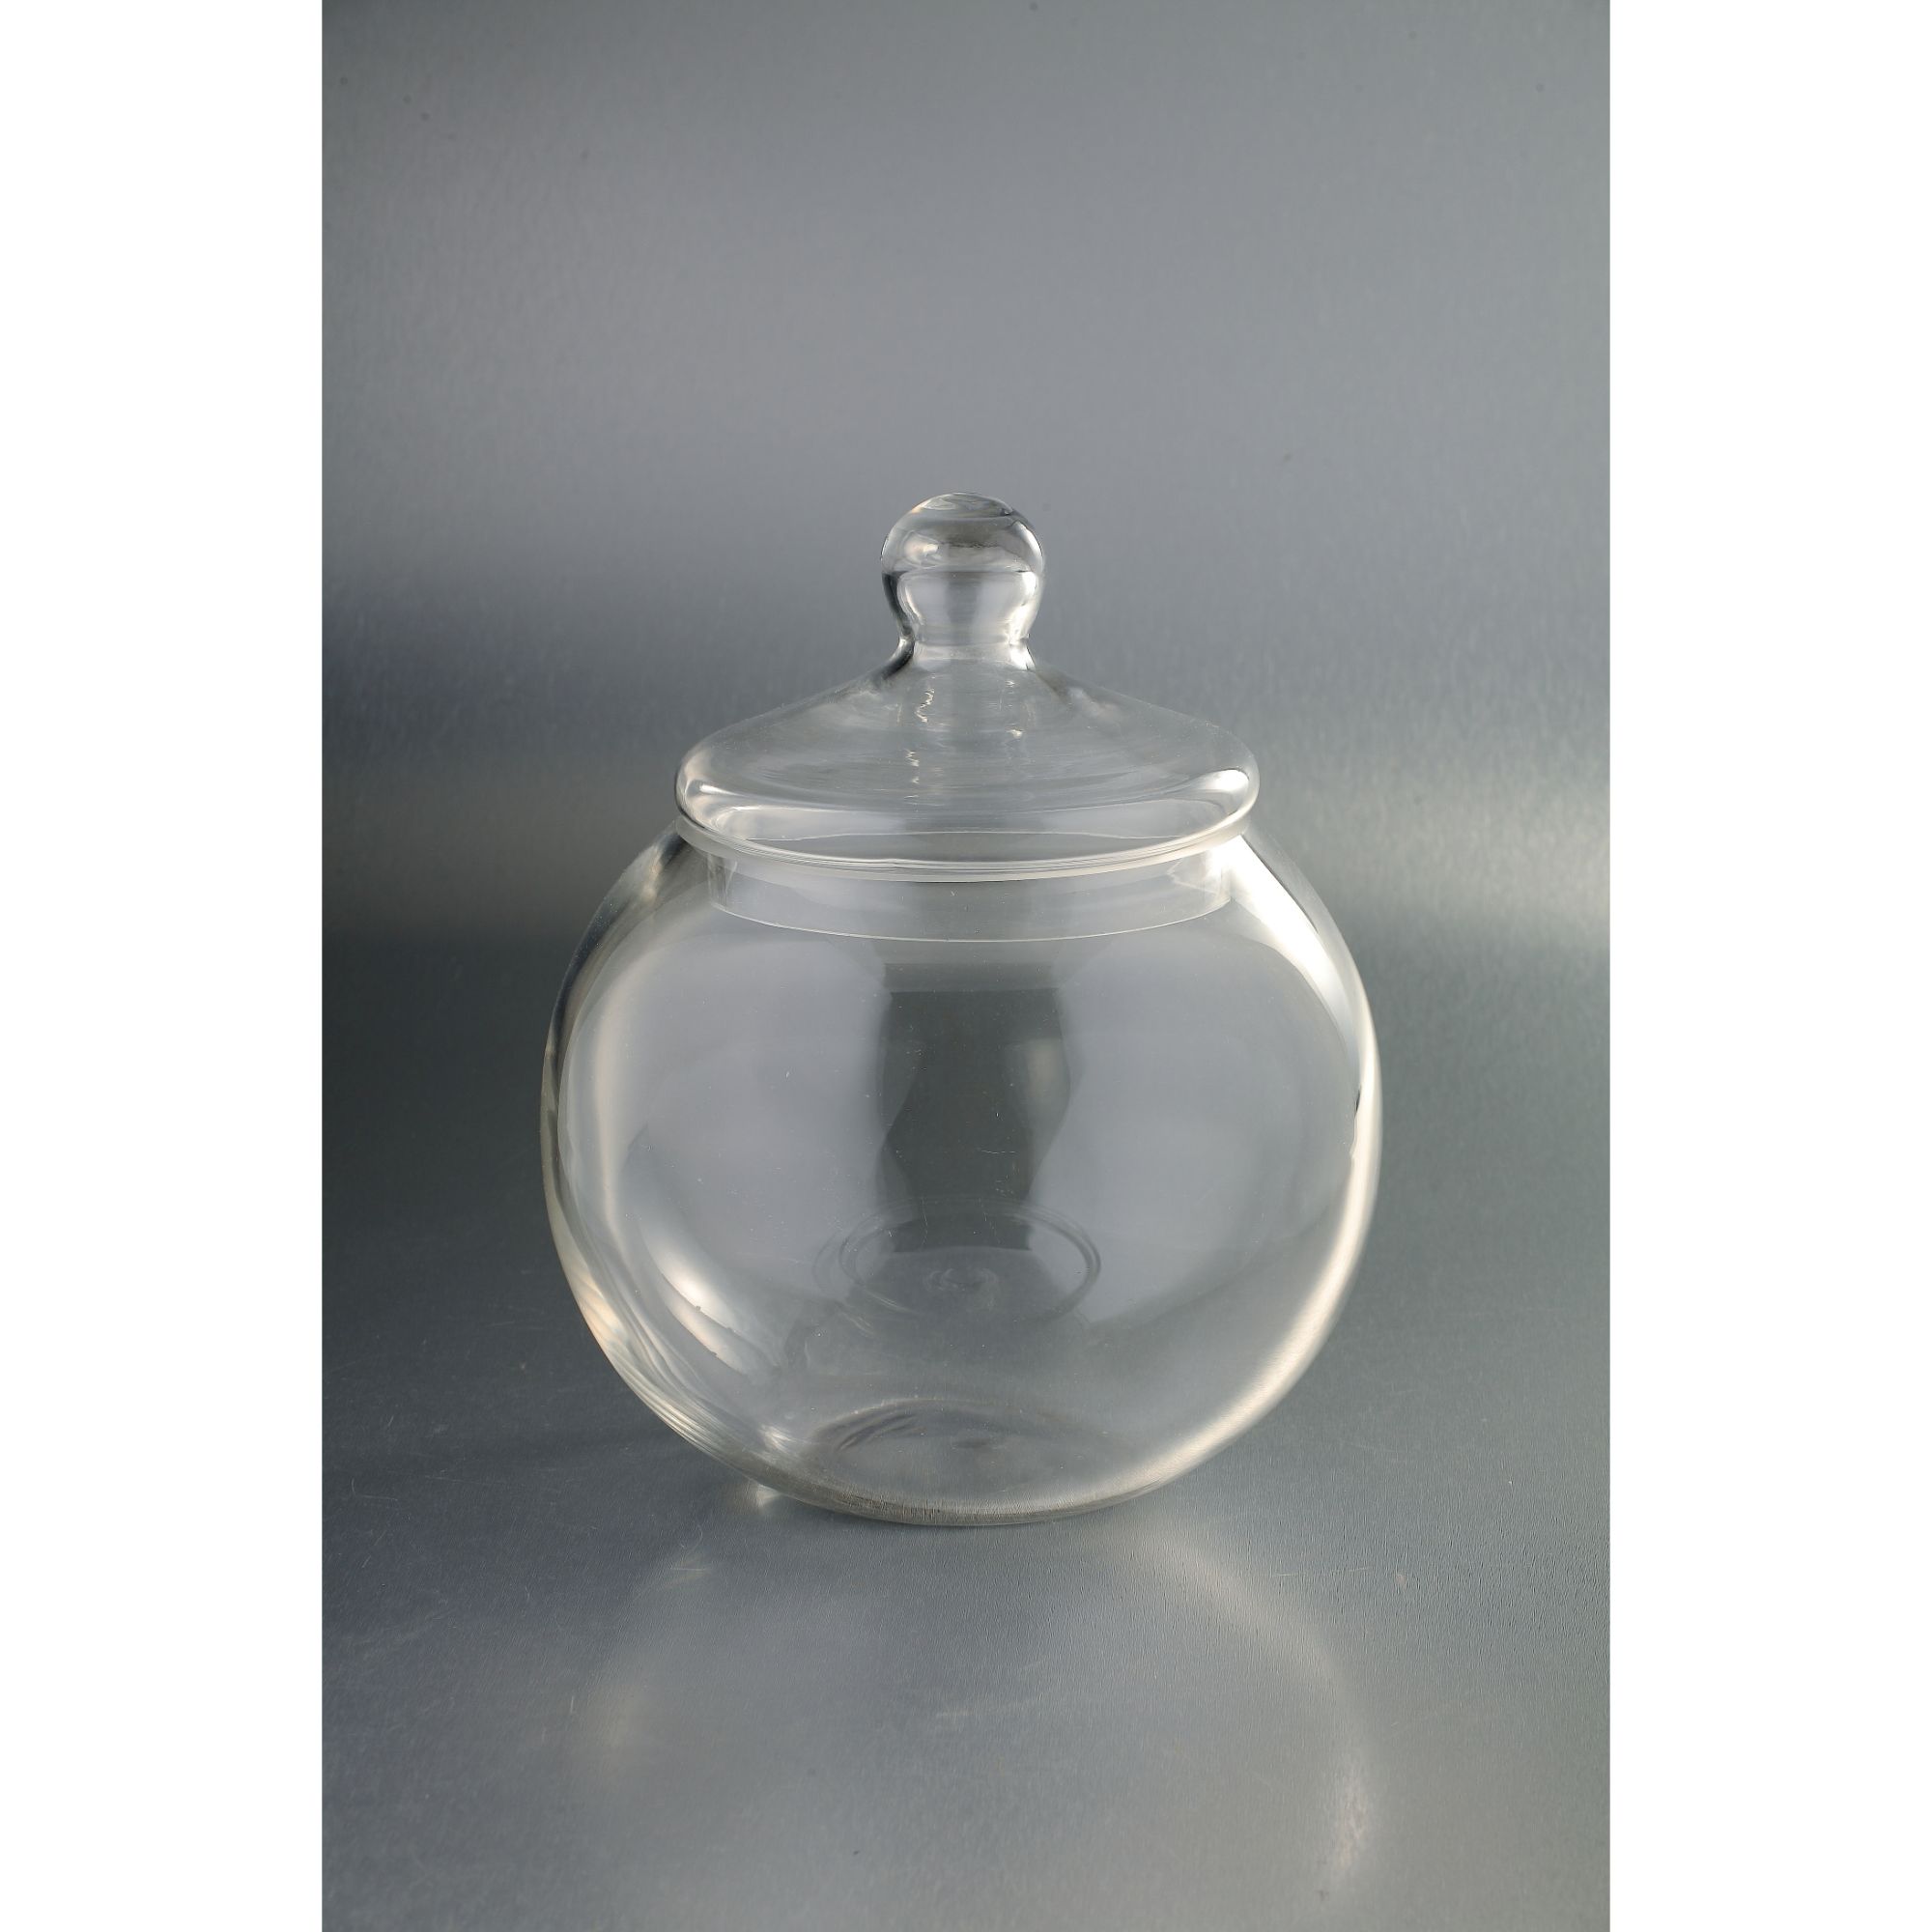 CC Home Furnishings 11" Clear Spherical Candy Dish Jar with Finial Lid